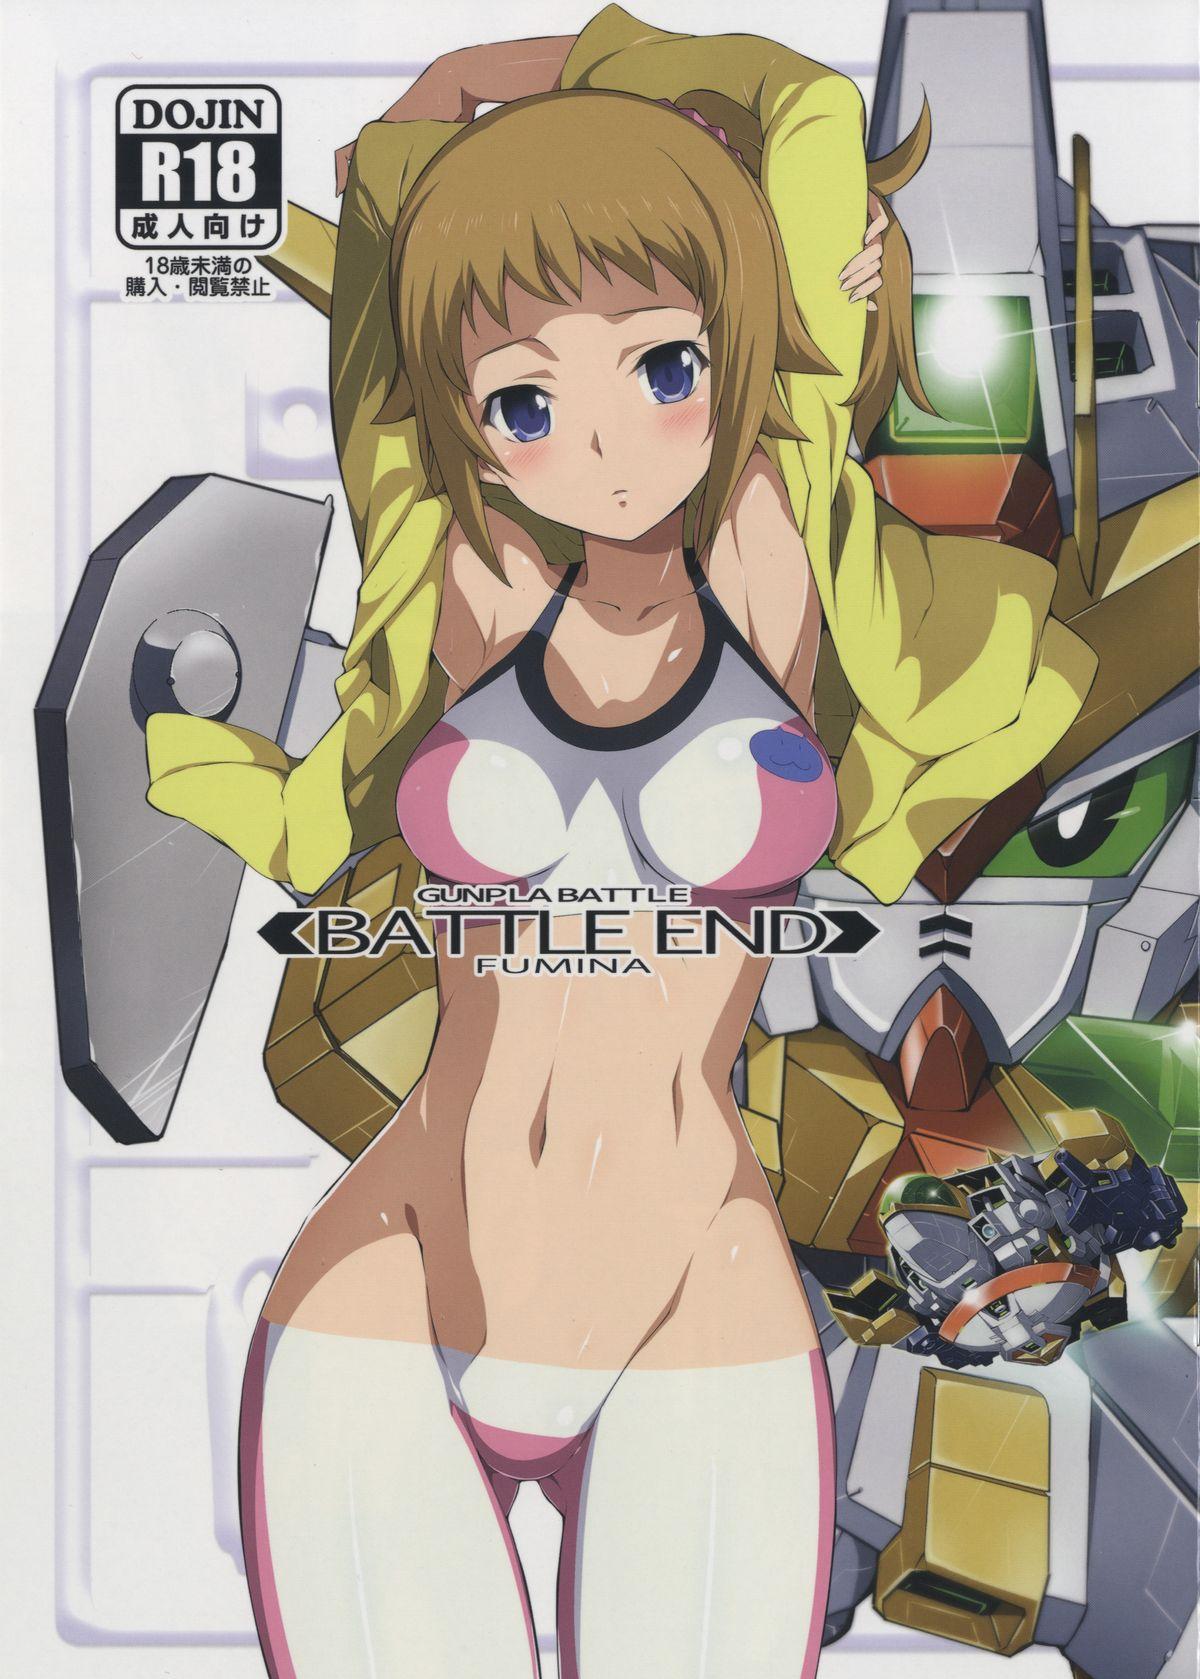 Whatsapp BATTLE END FUMINA - Gundam build fighters try Atm - Picture 1